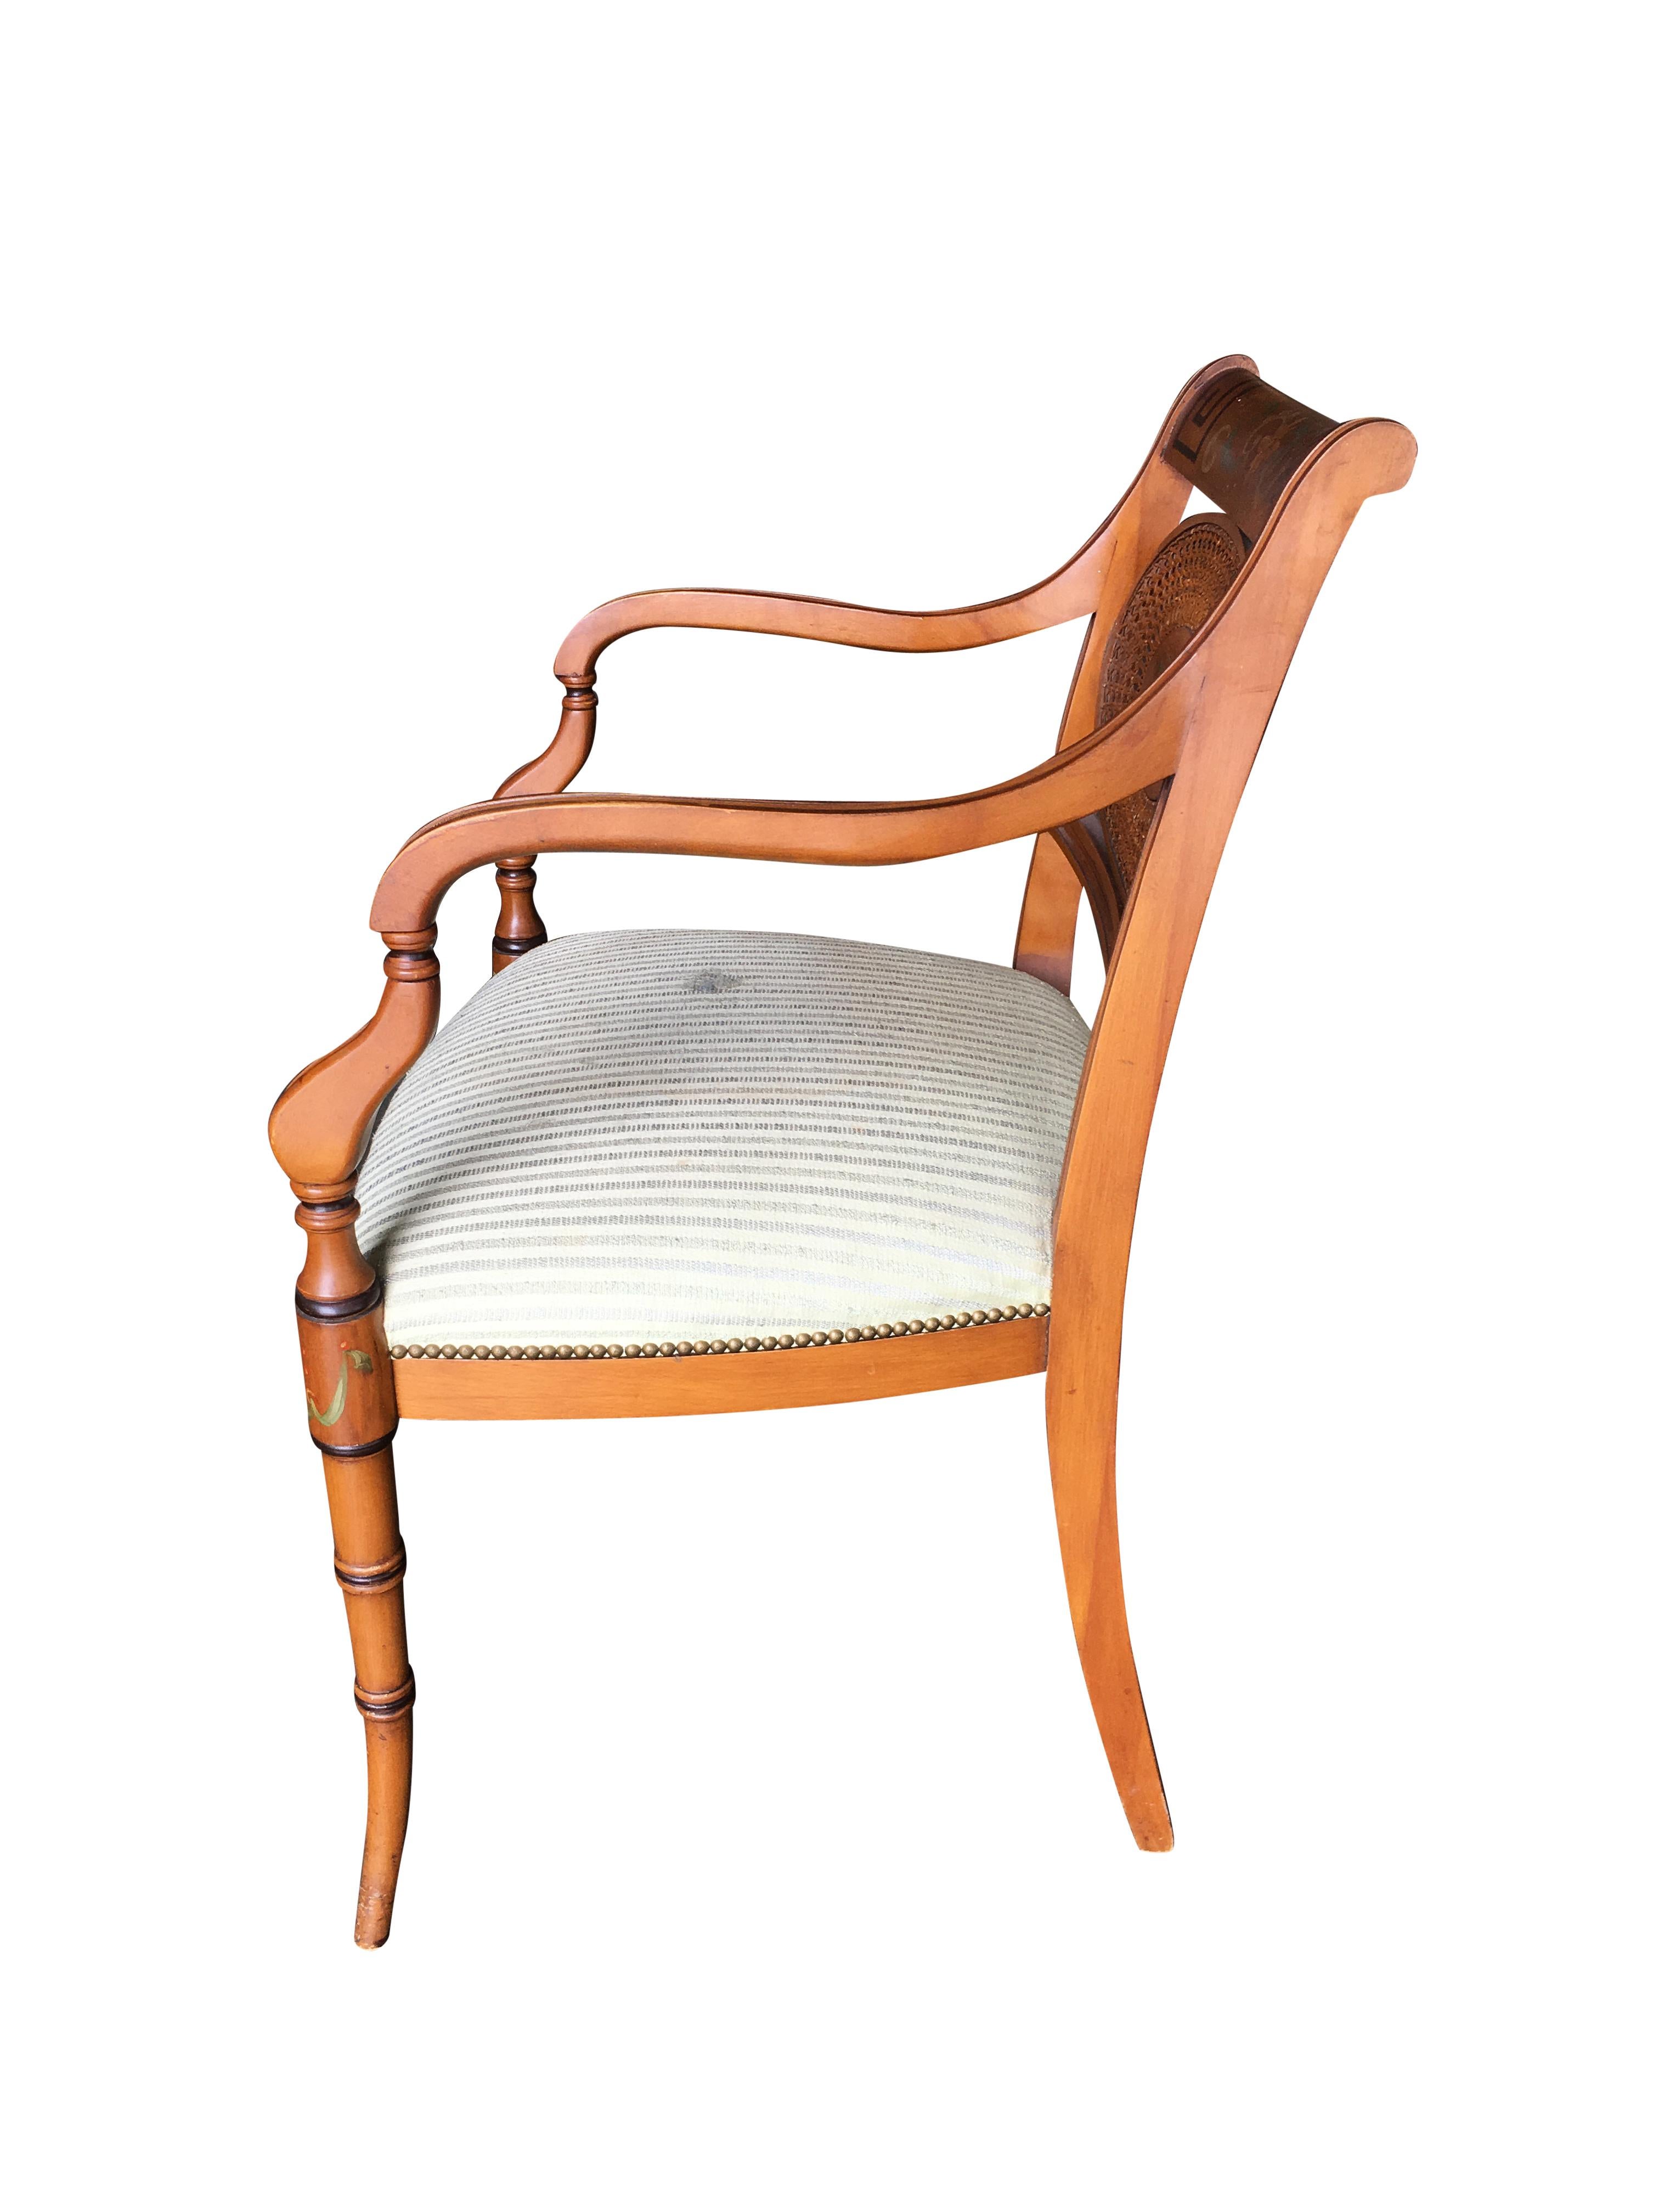 French neoclassic dining chair with hand-painted woven wicker back and sculpted legs.